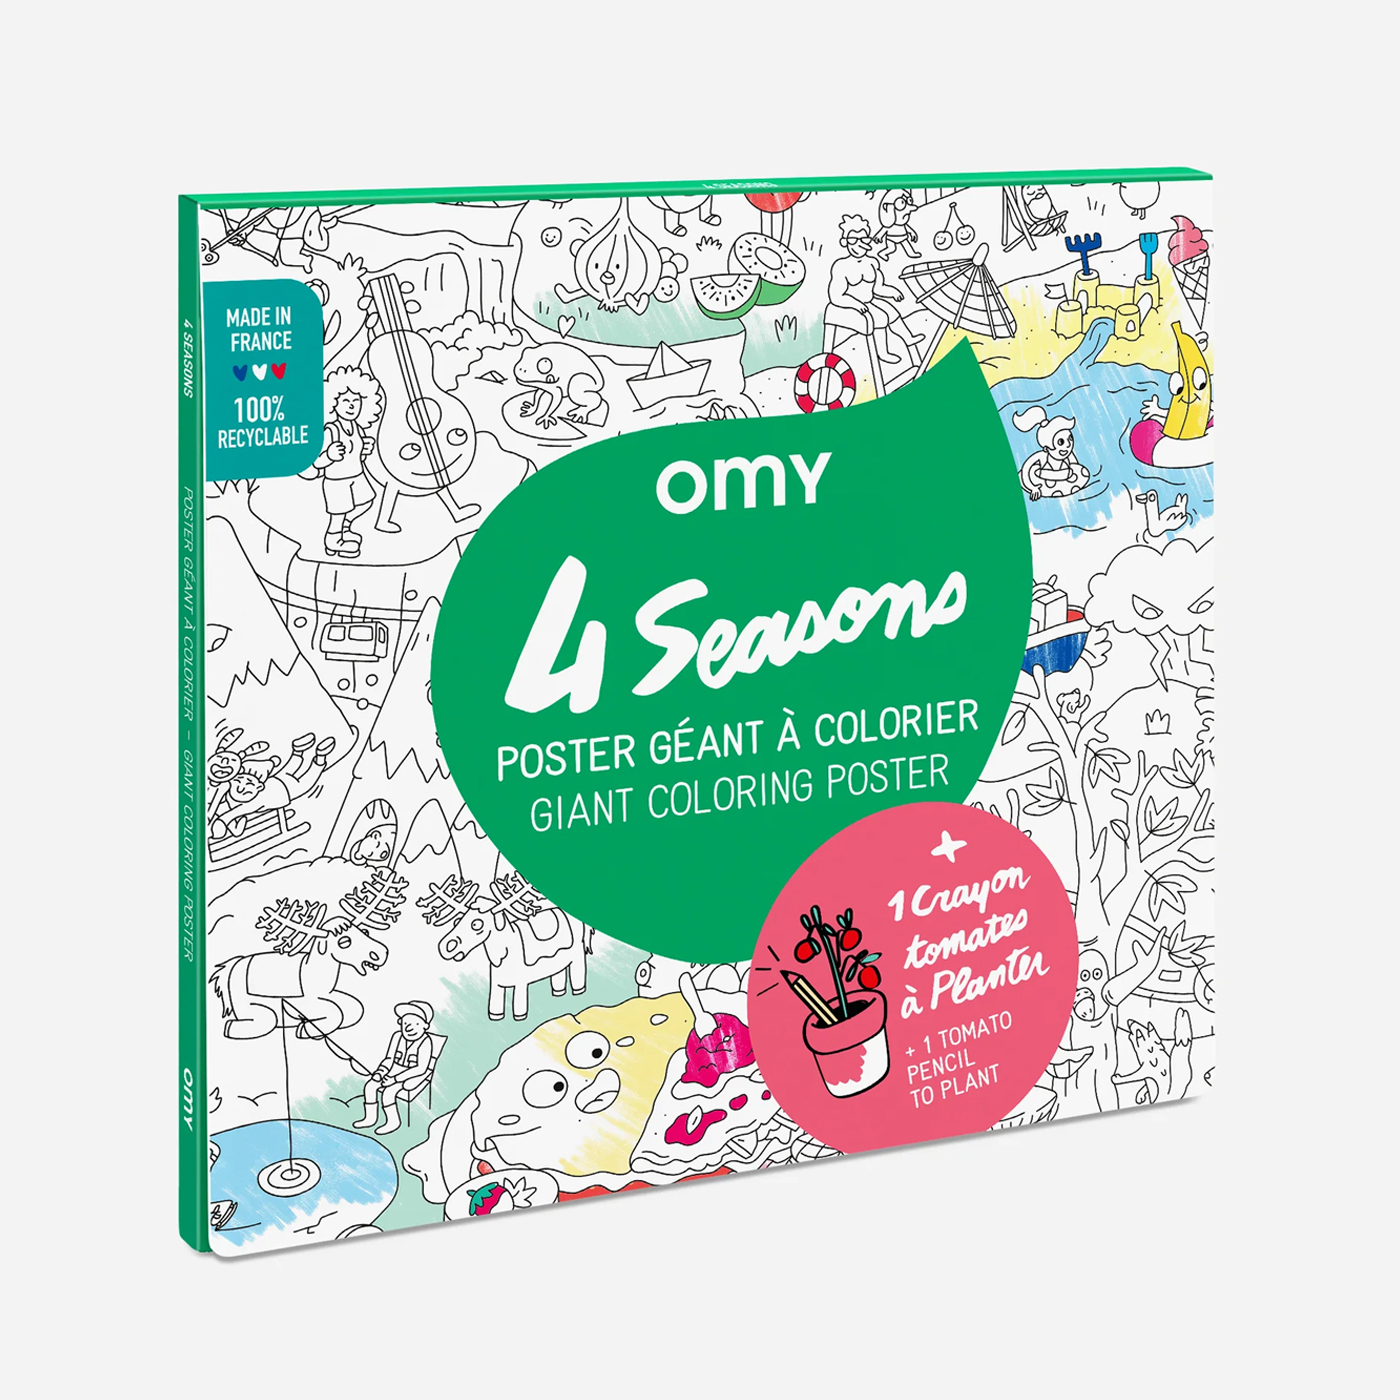  Omy Coloring Poster + Planting Pencil